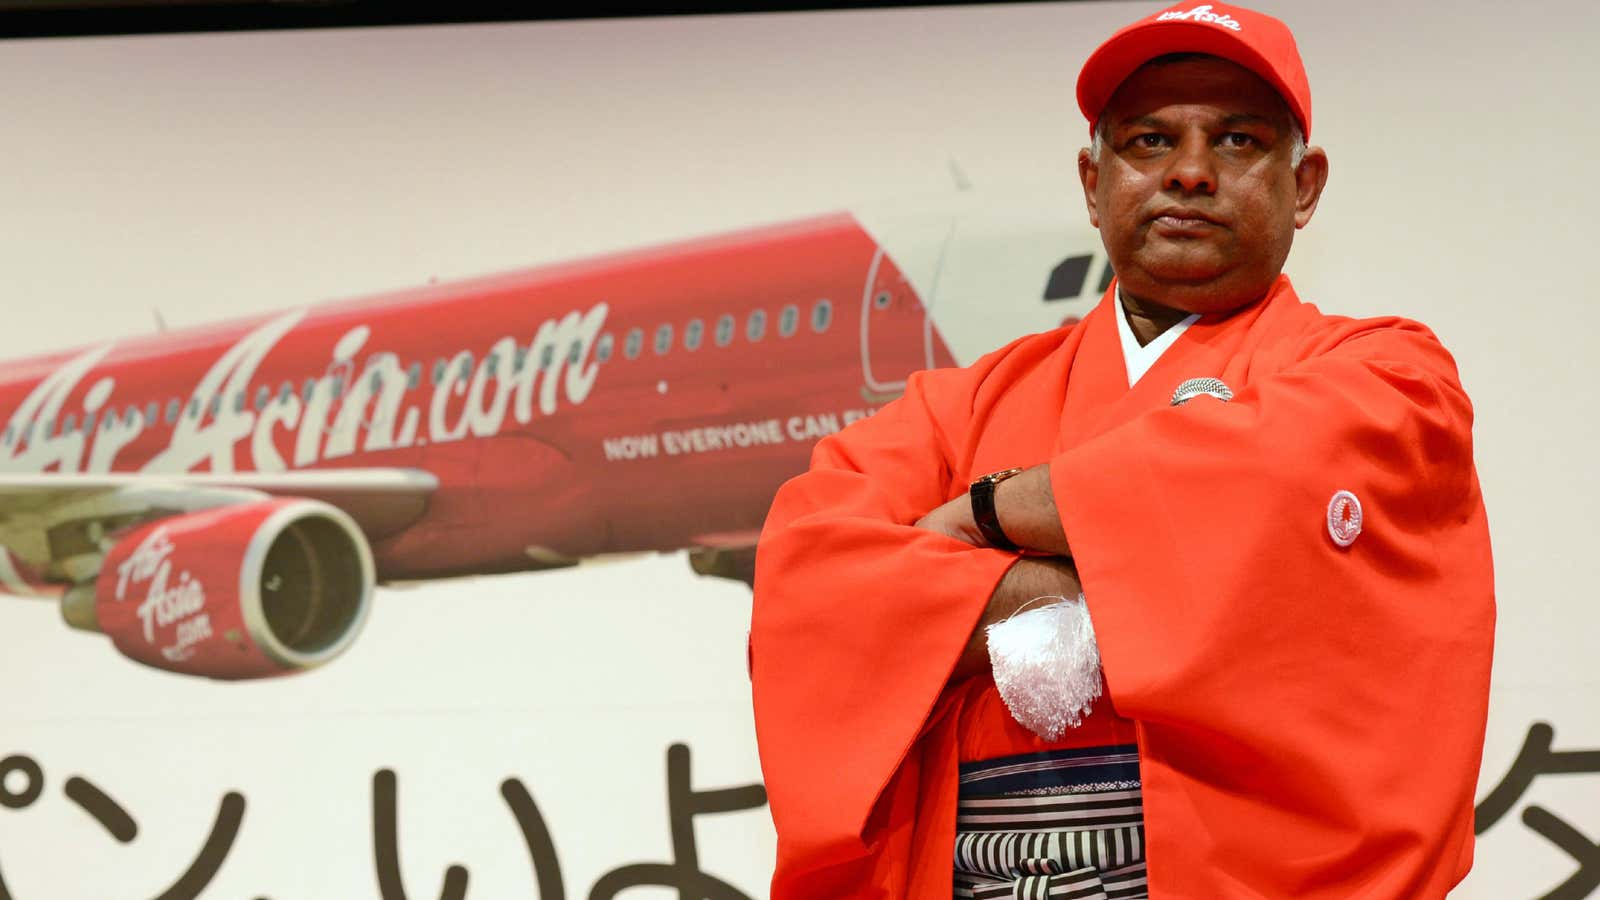 Is it time for Tony Fernandes to say “Sayonara”?